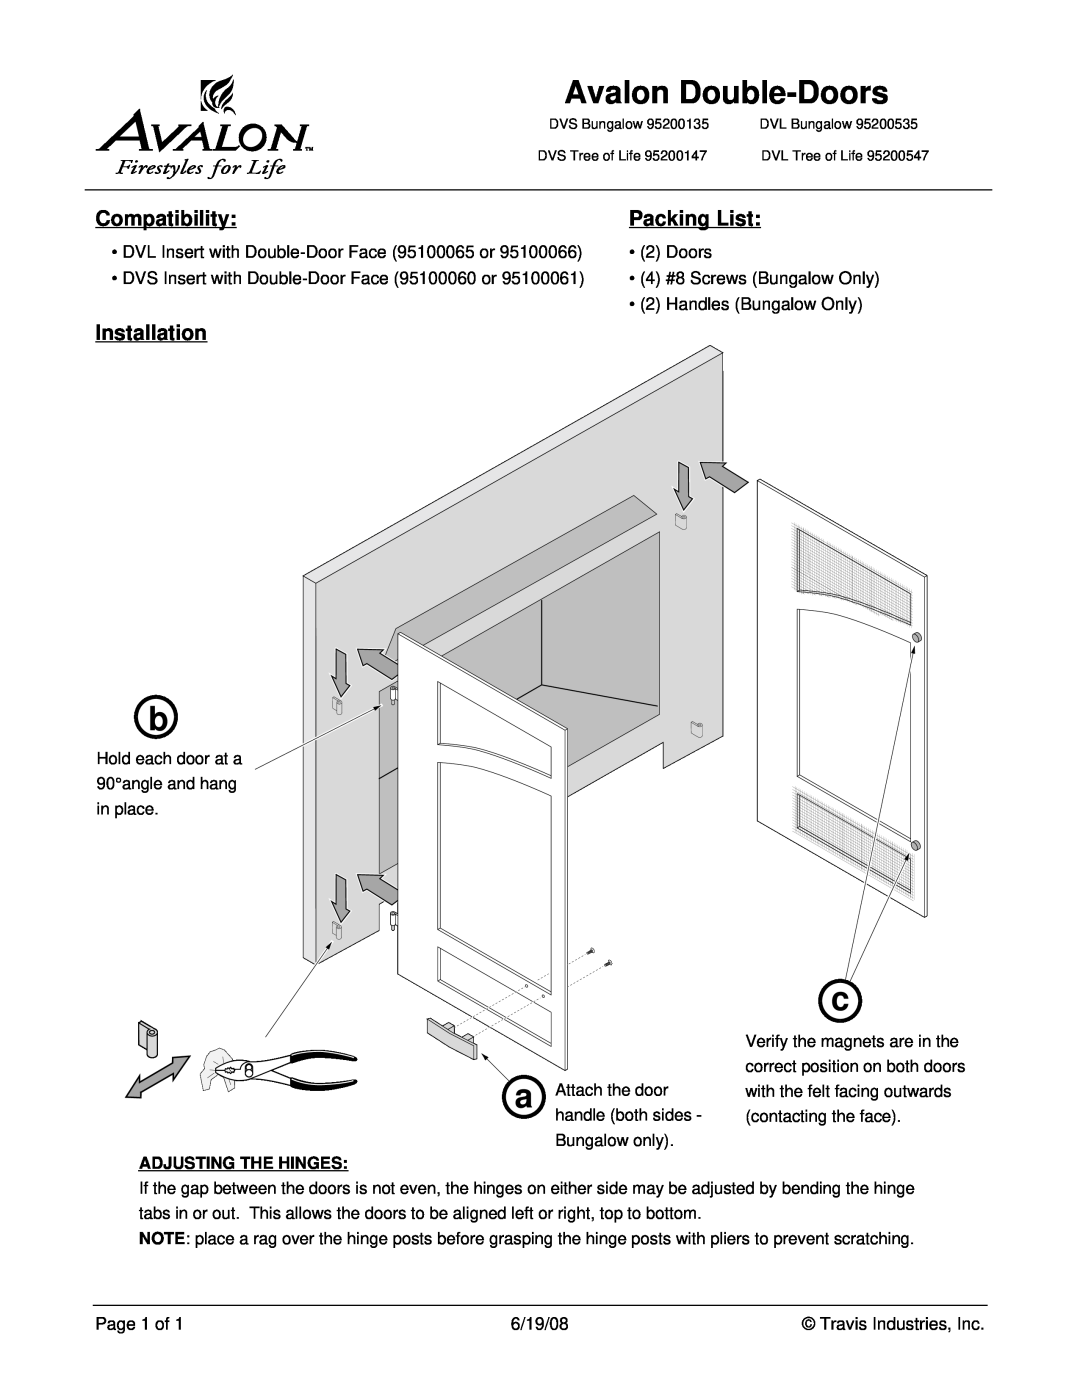 Avalon Stoves 95200135 manual Avalon Double-Doors, Compatibility, Packing List, Installation, Adjusting The Hinges 